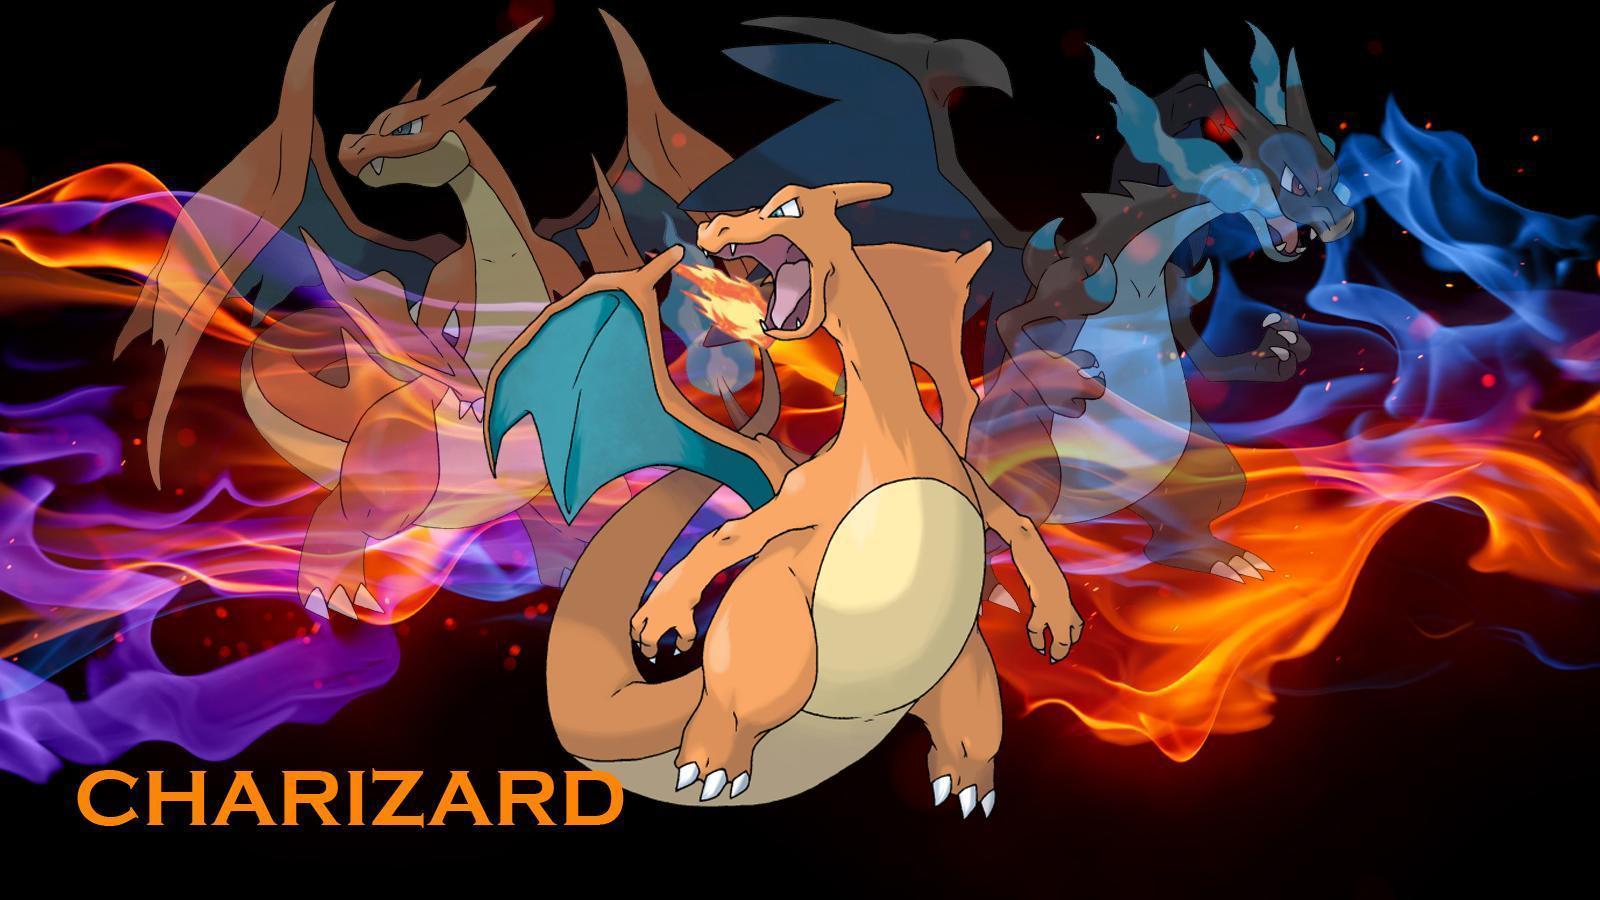 Charizard Wallpapers Wallpaper Cave.